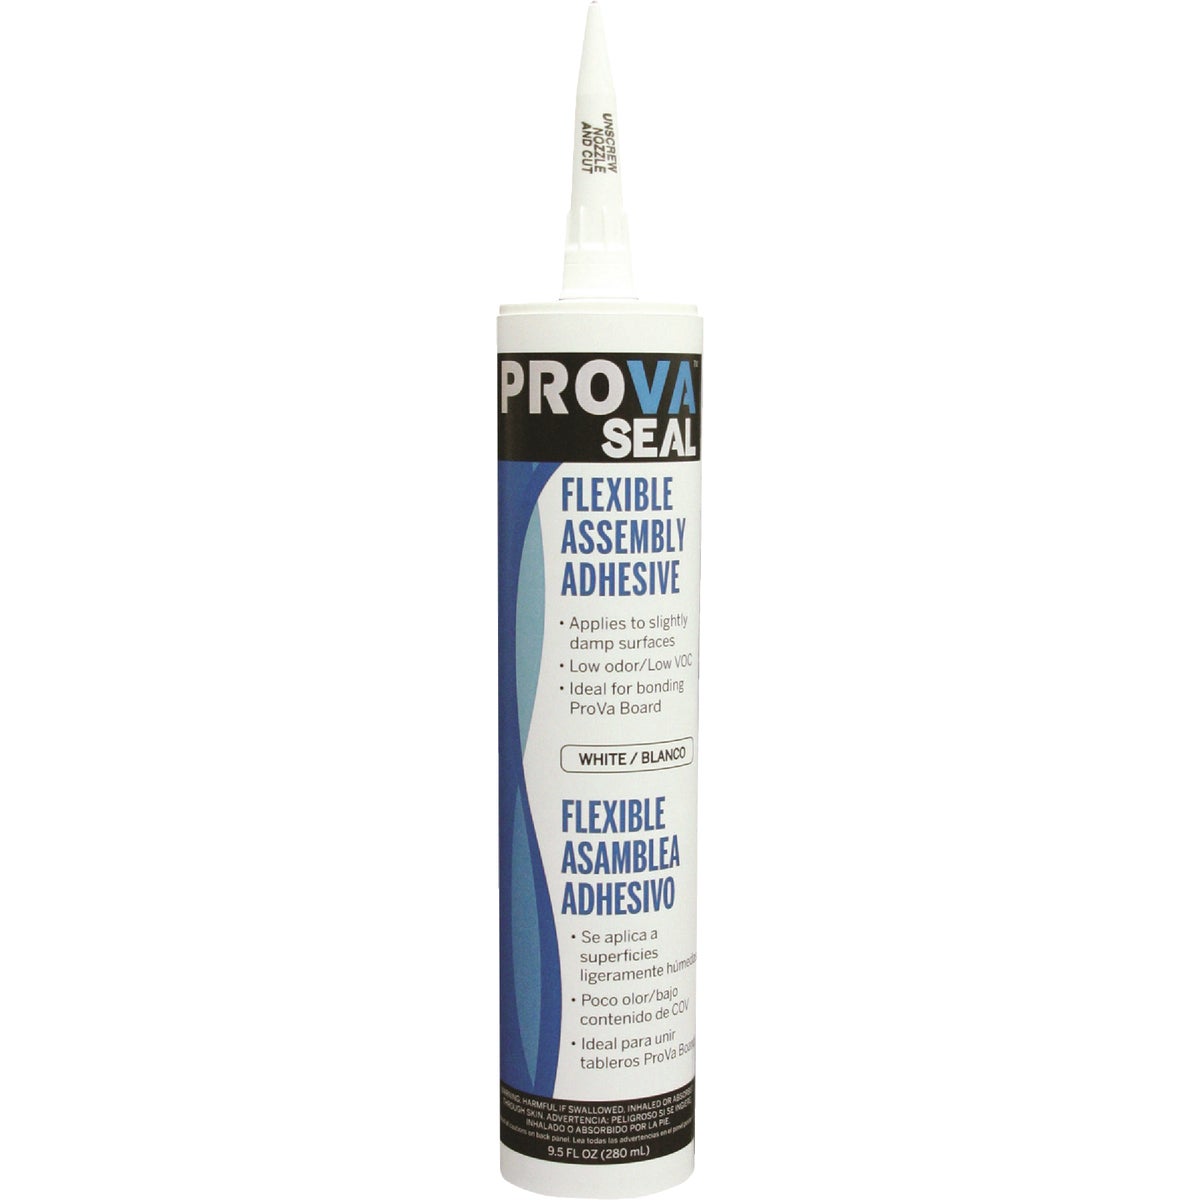 Item 100592, Prova Seal is a hybrid silicone sealant that features a polymer base that 